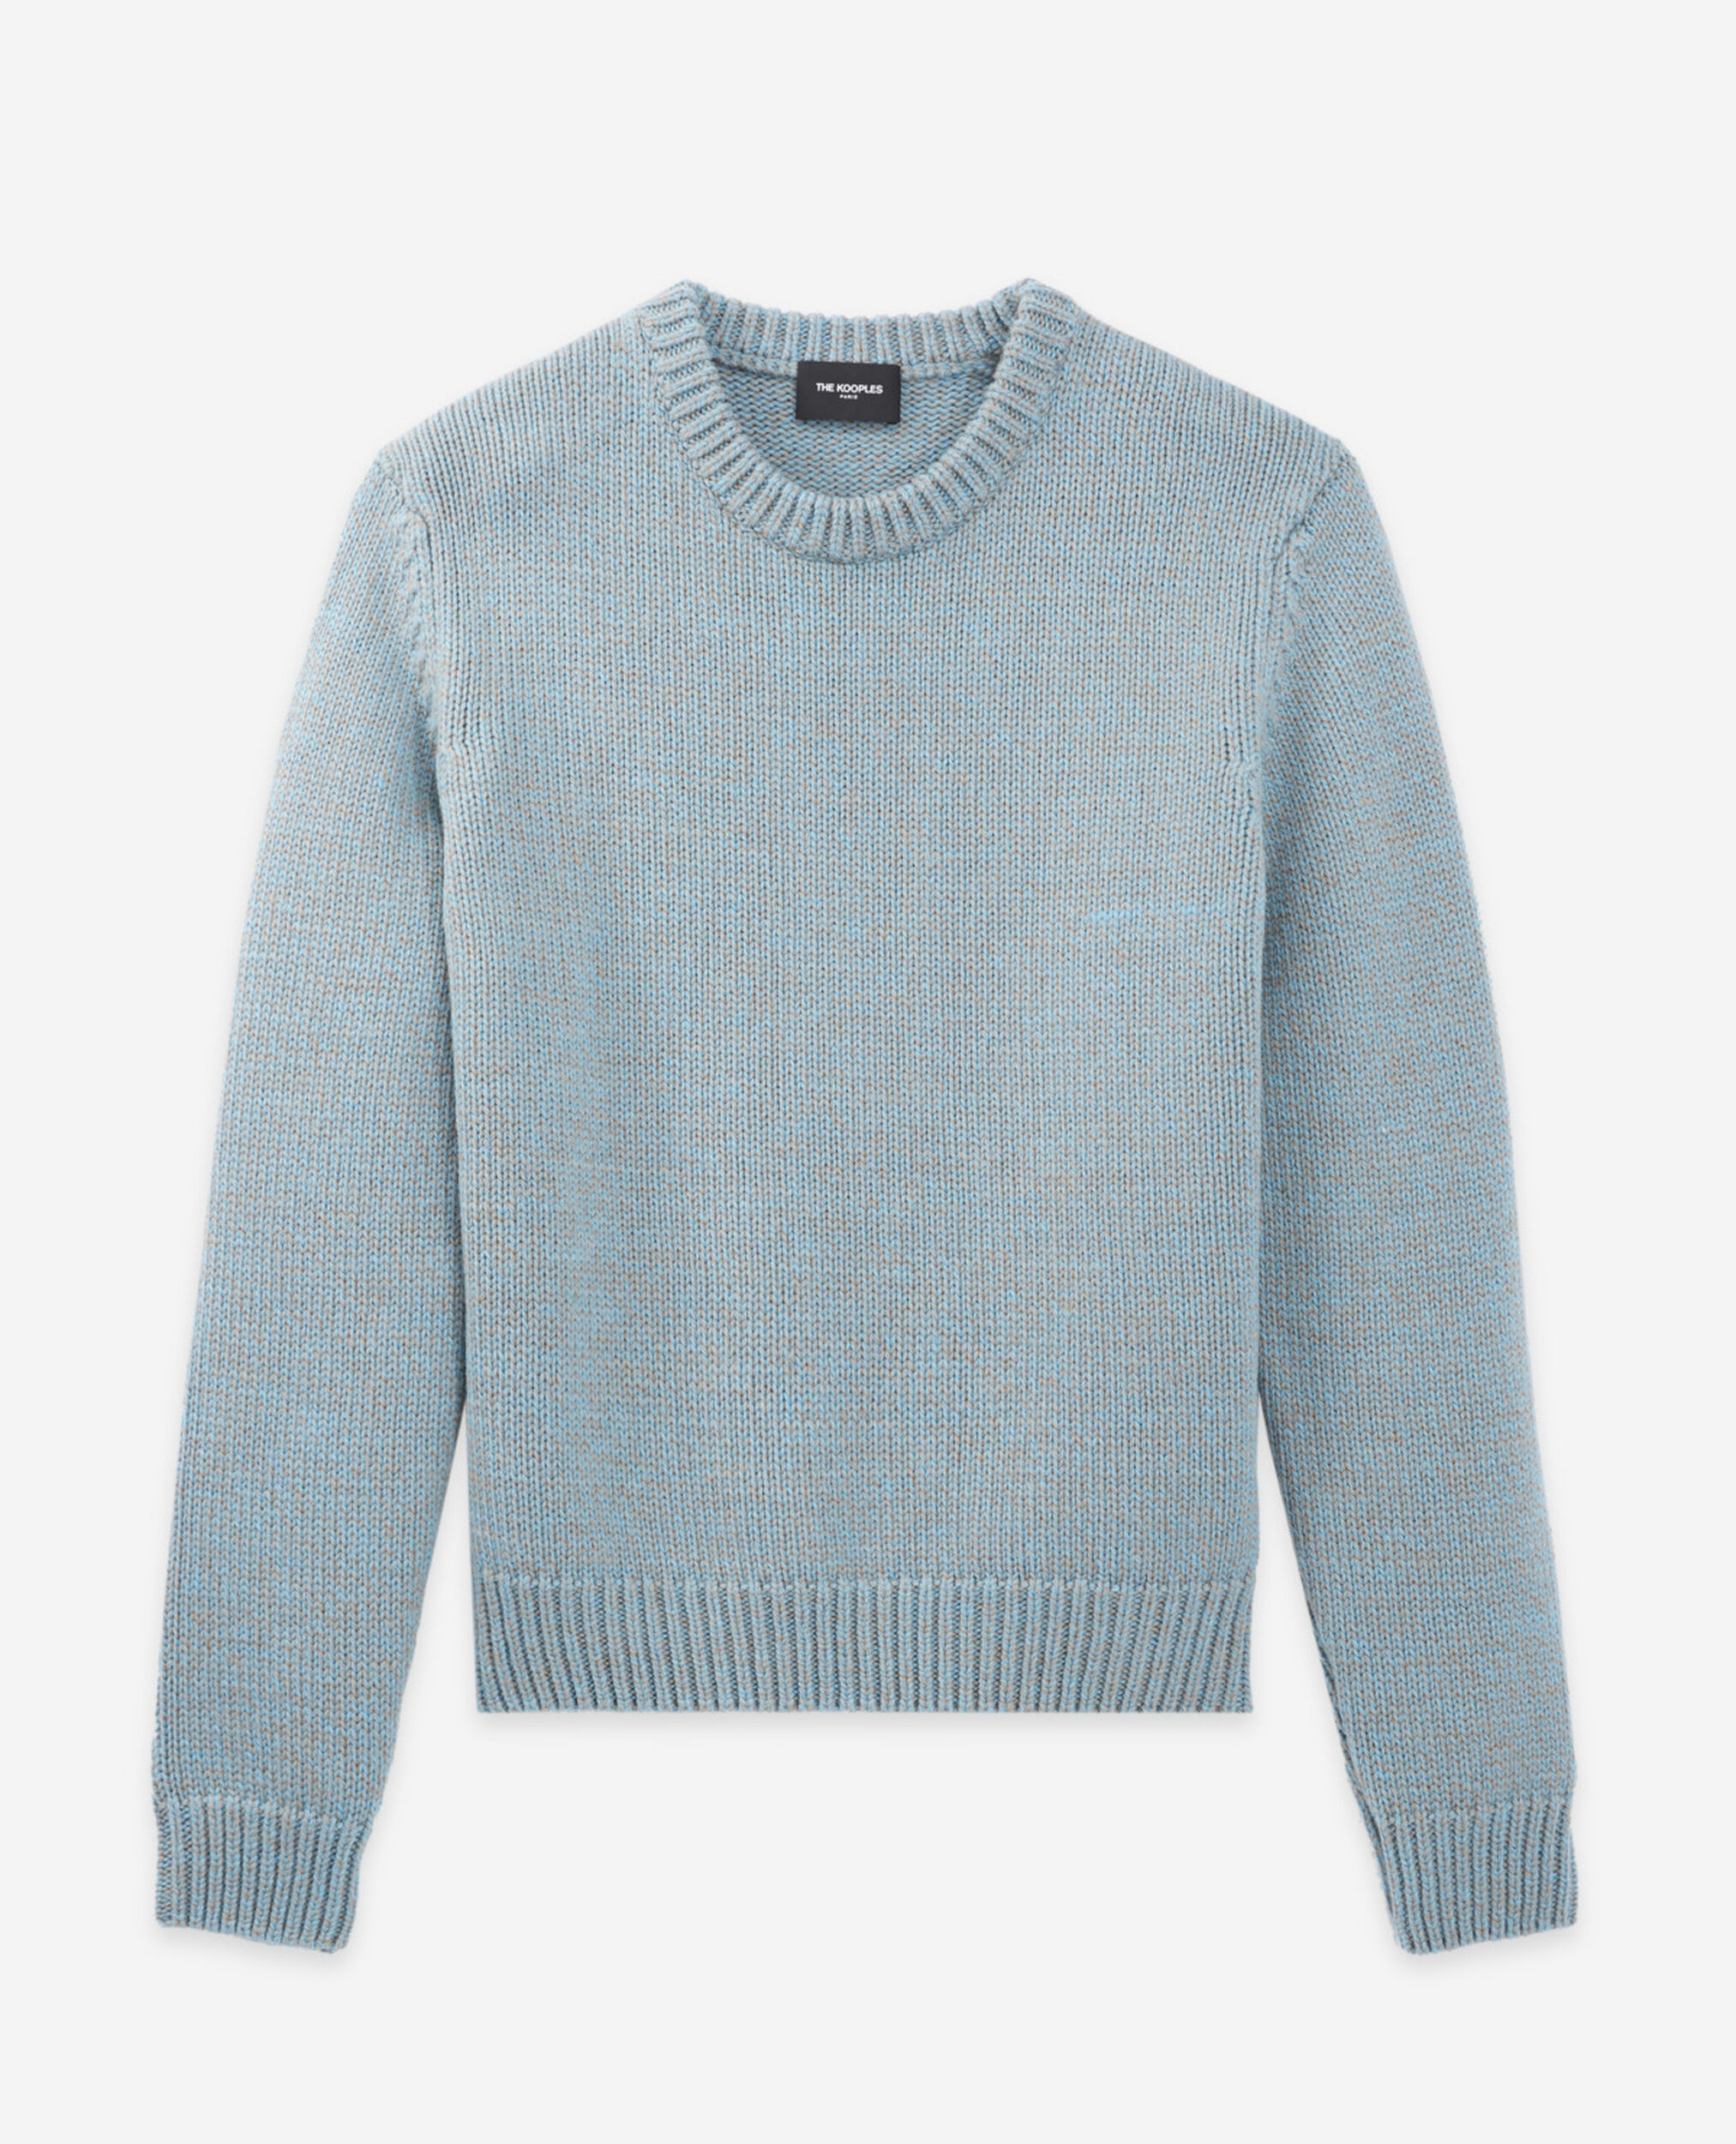 Light blue wool sweater w/ classic crew neck, MULTICOLOR BABY BLUE, hi-res image number null